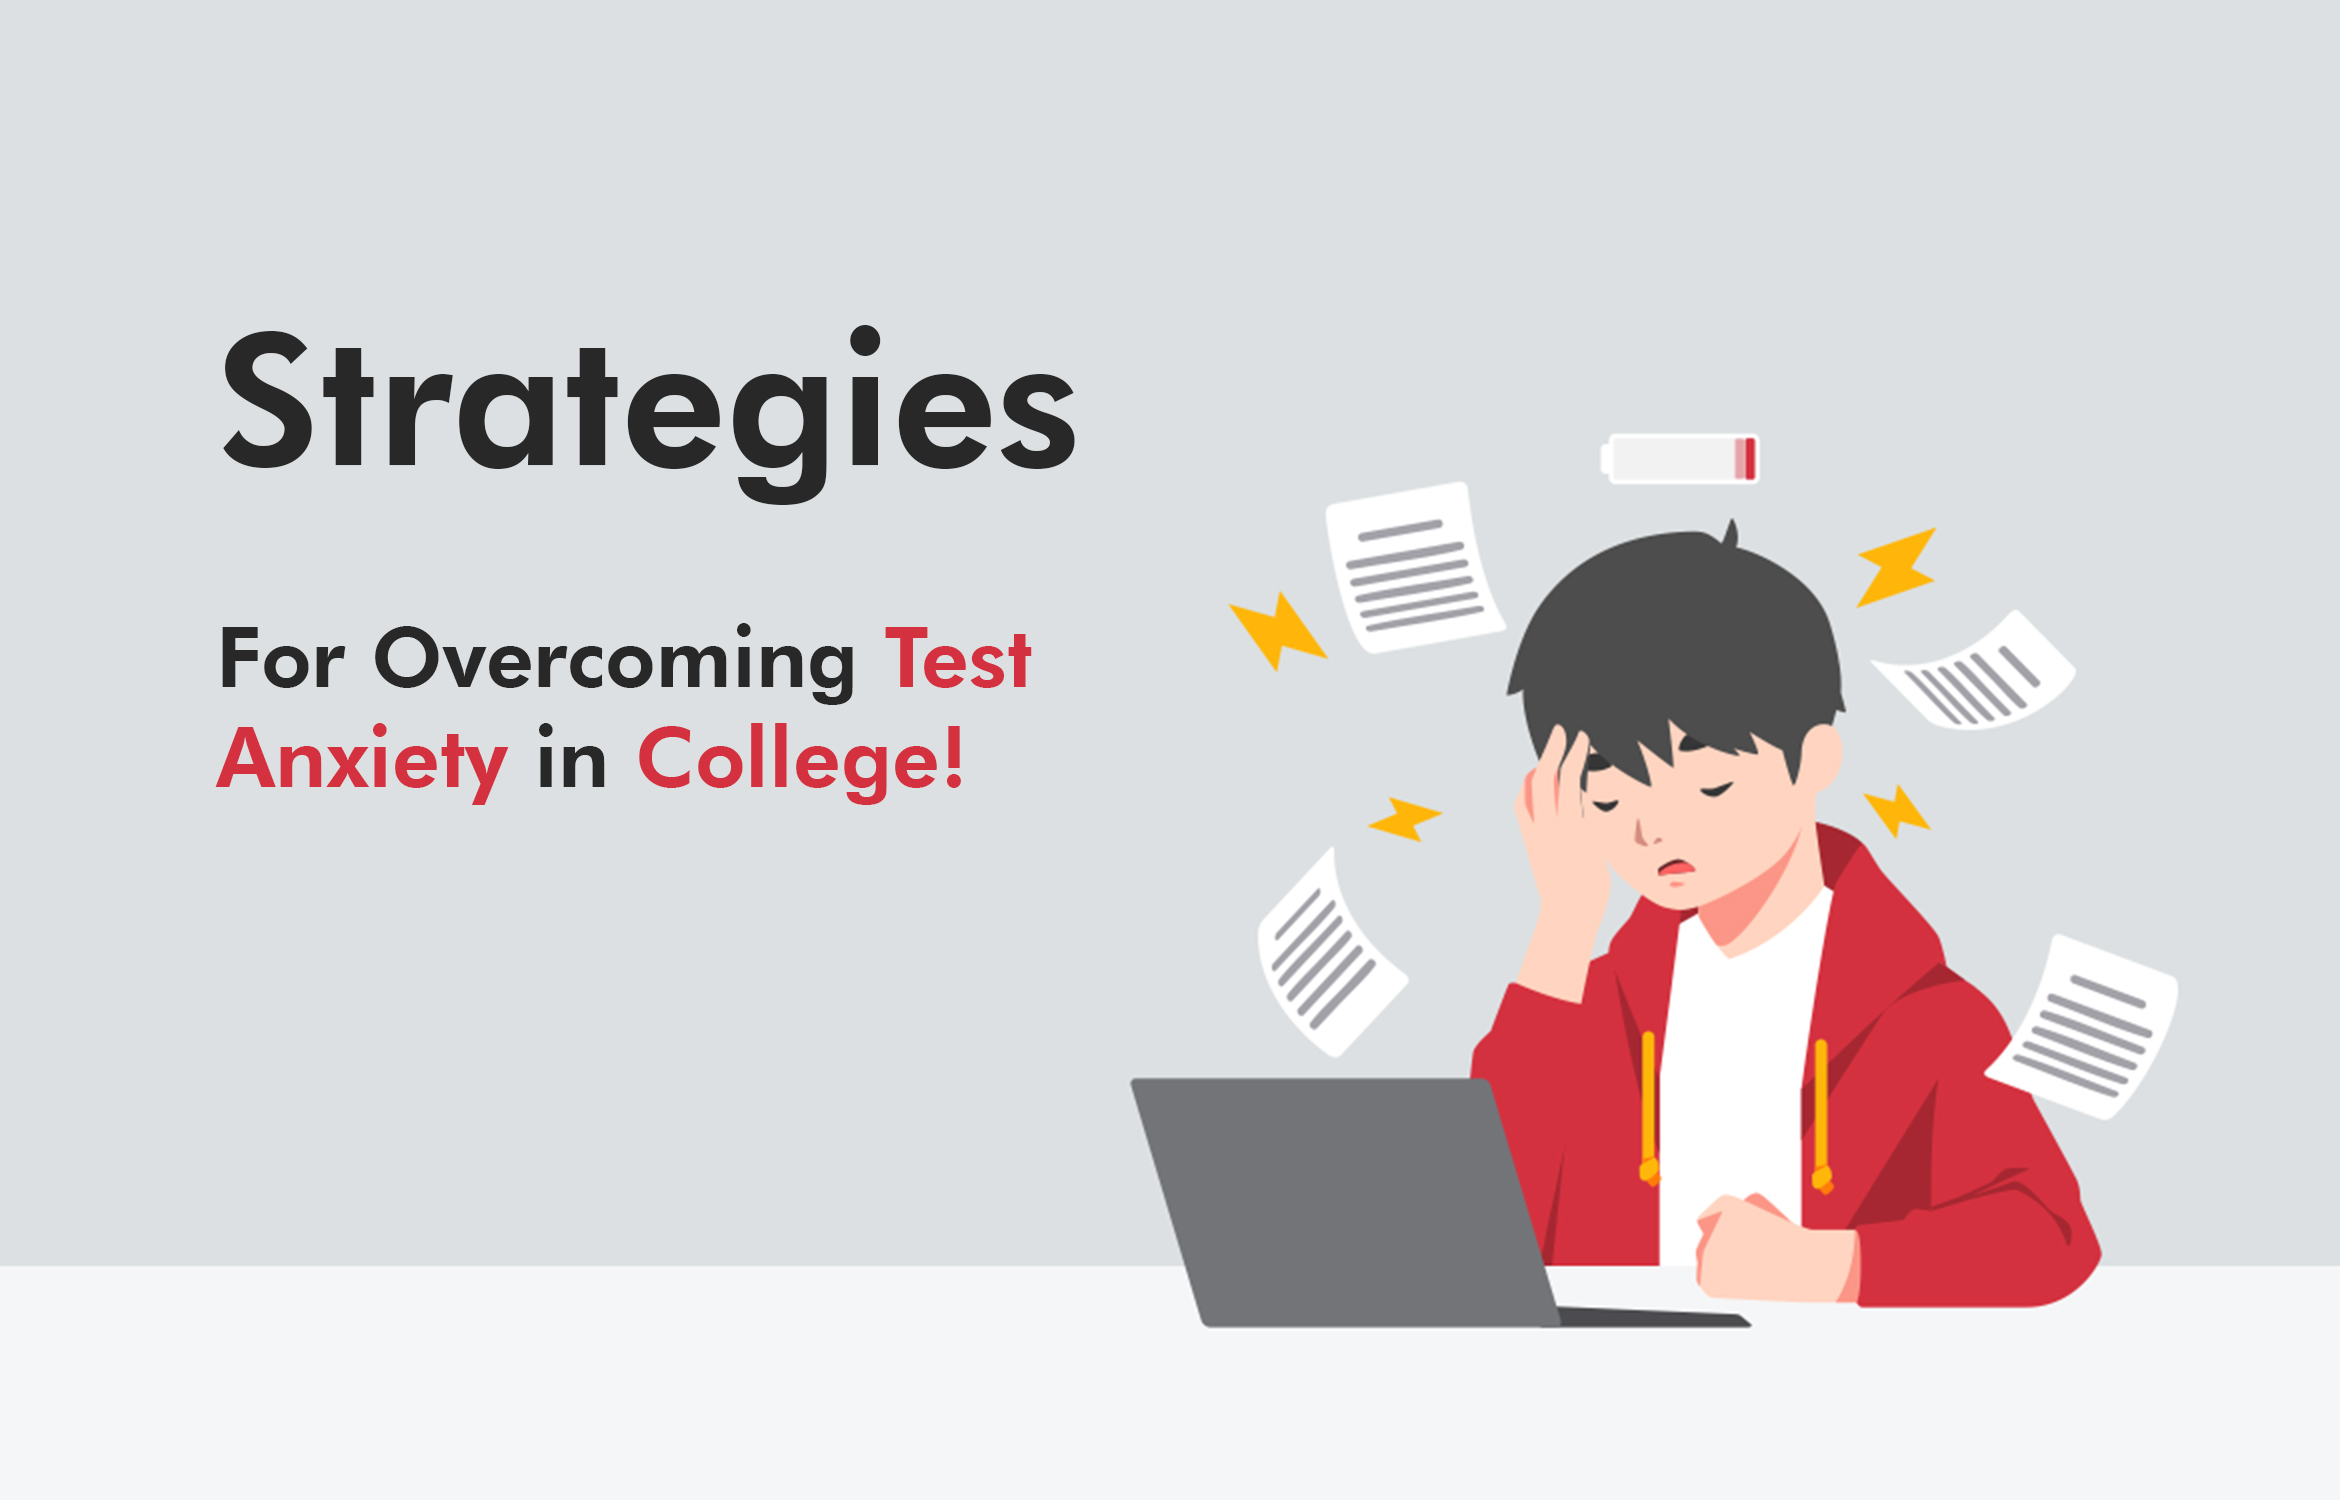 Strategies for Overcoming Test Anxiety in College